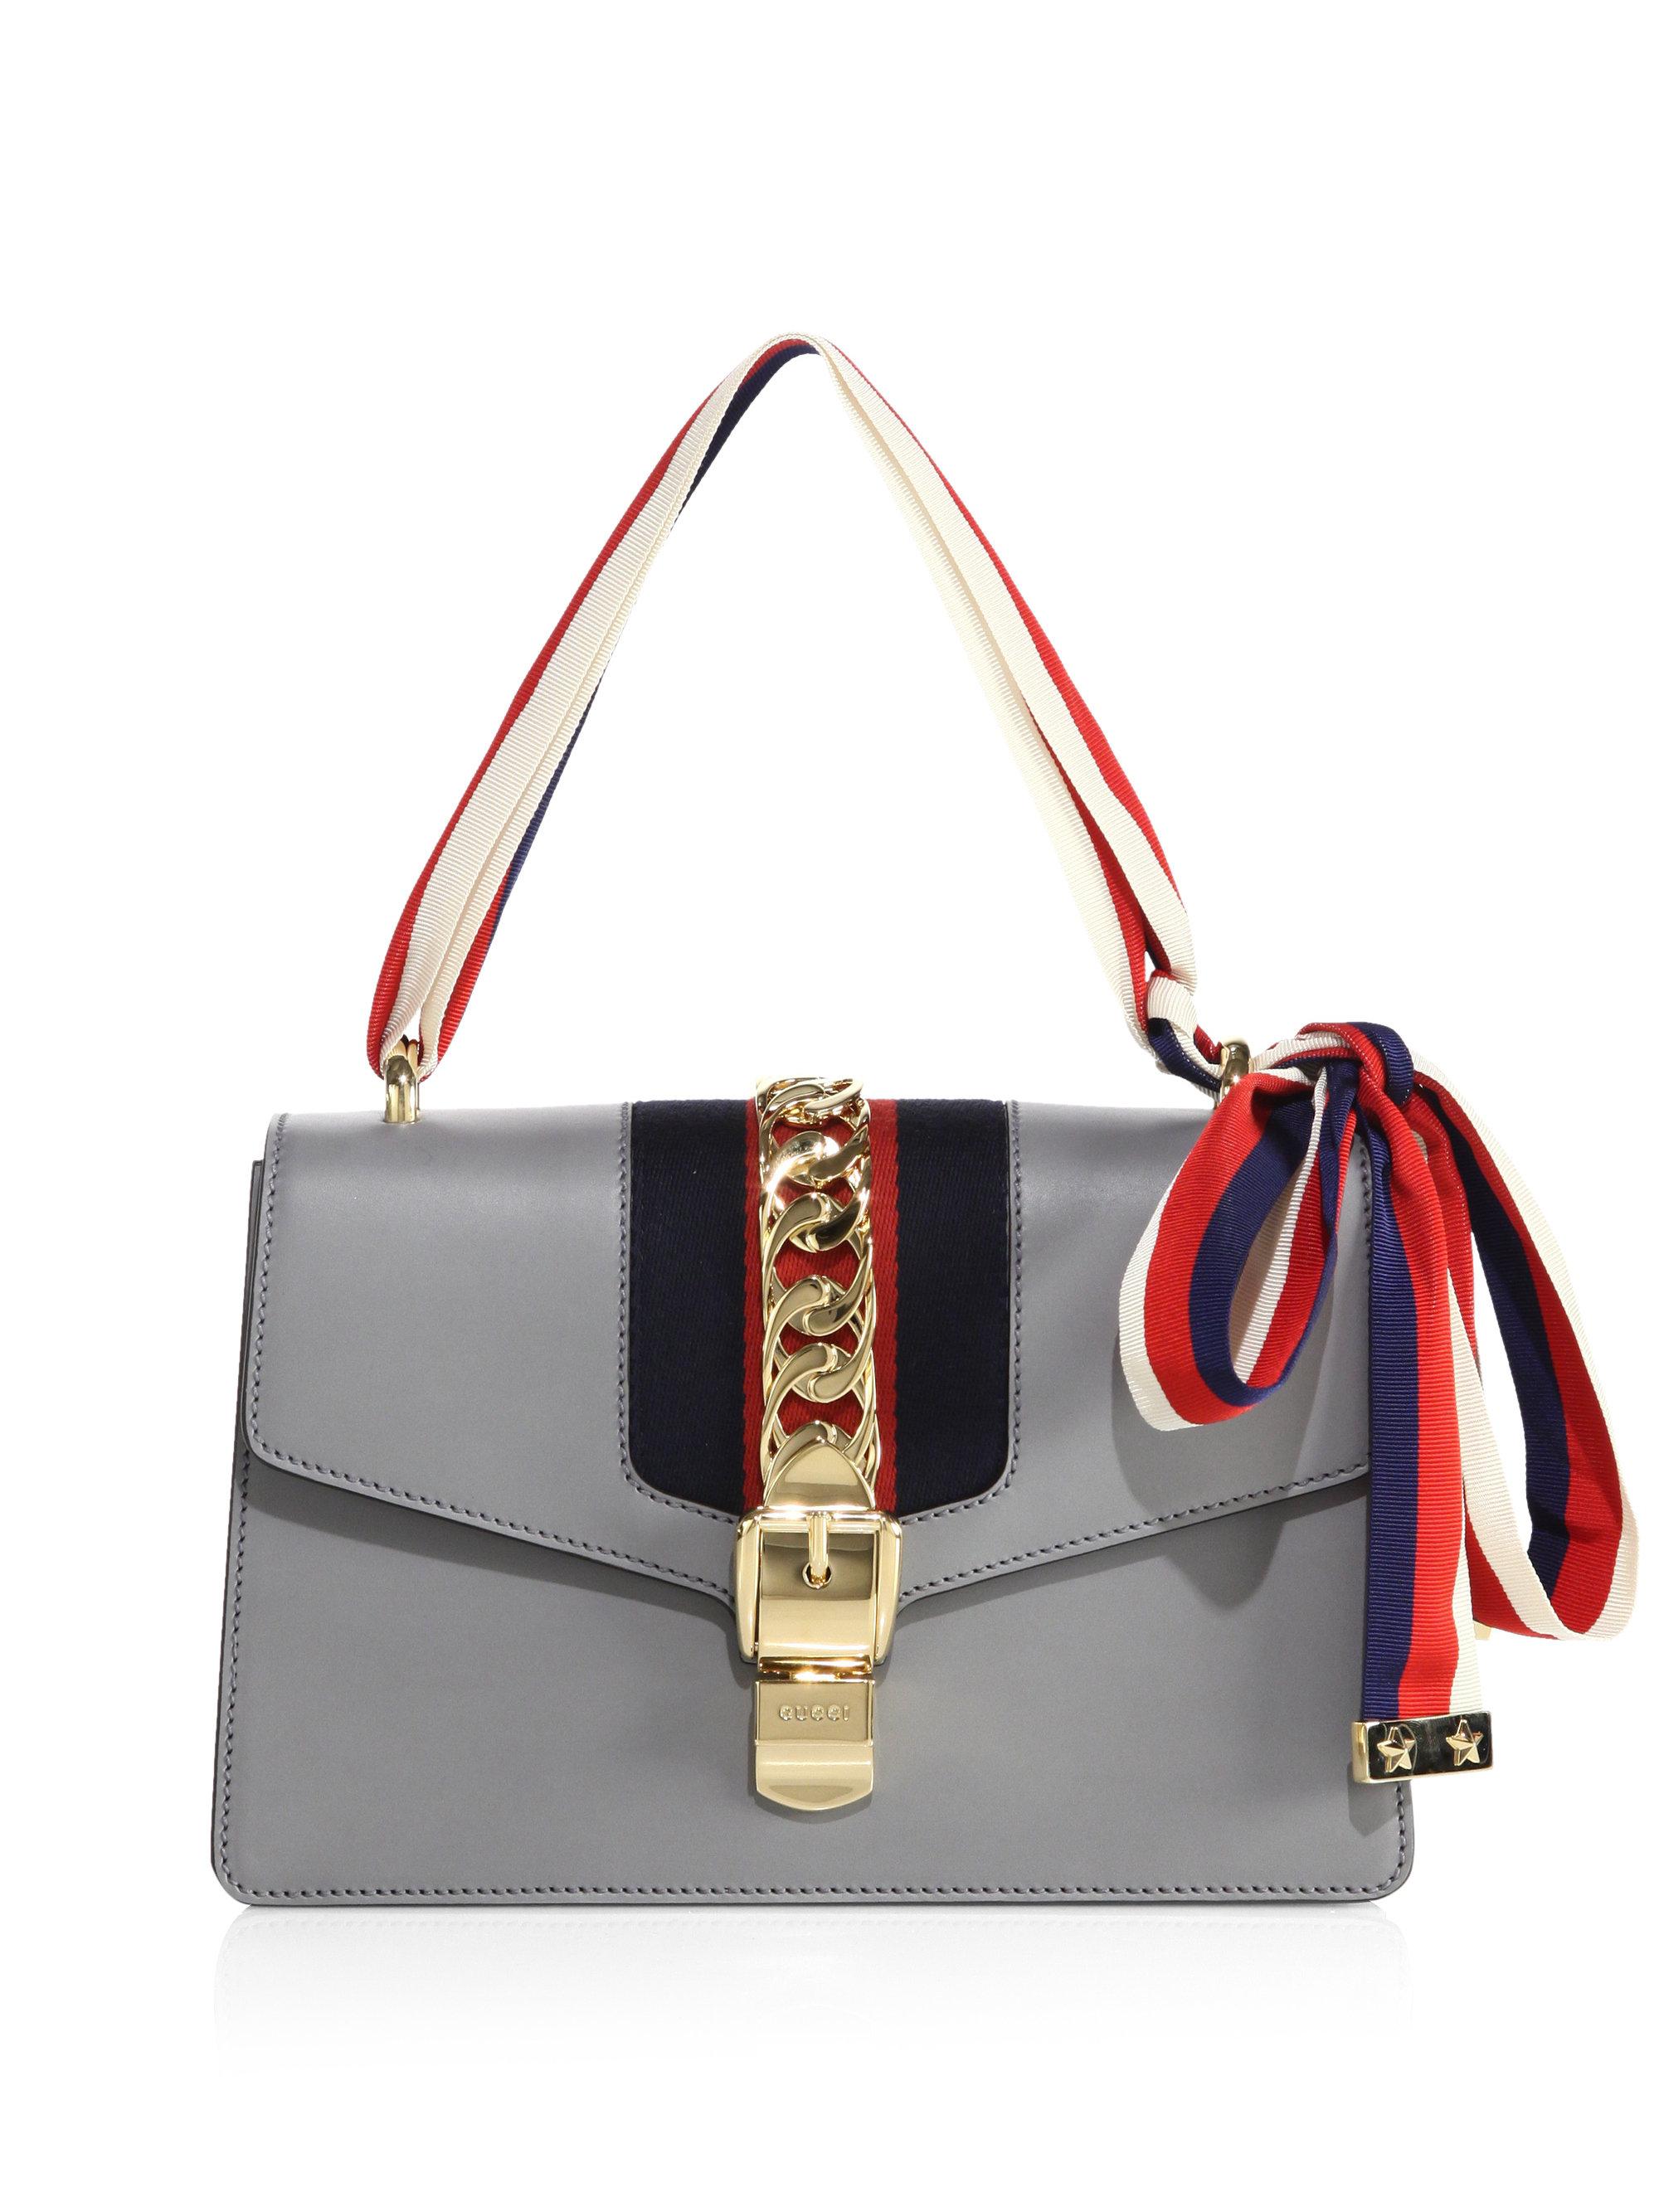 Gucci Sylvie Leather Shoulder Bag in Gray - Lyst